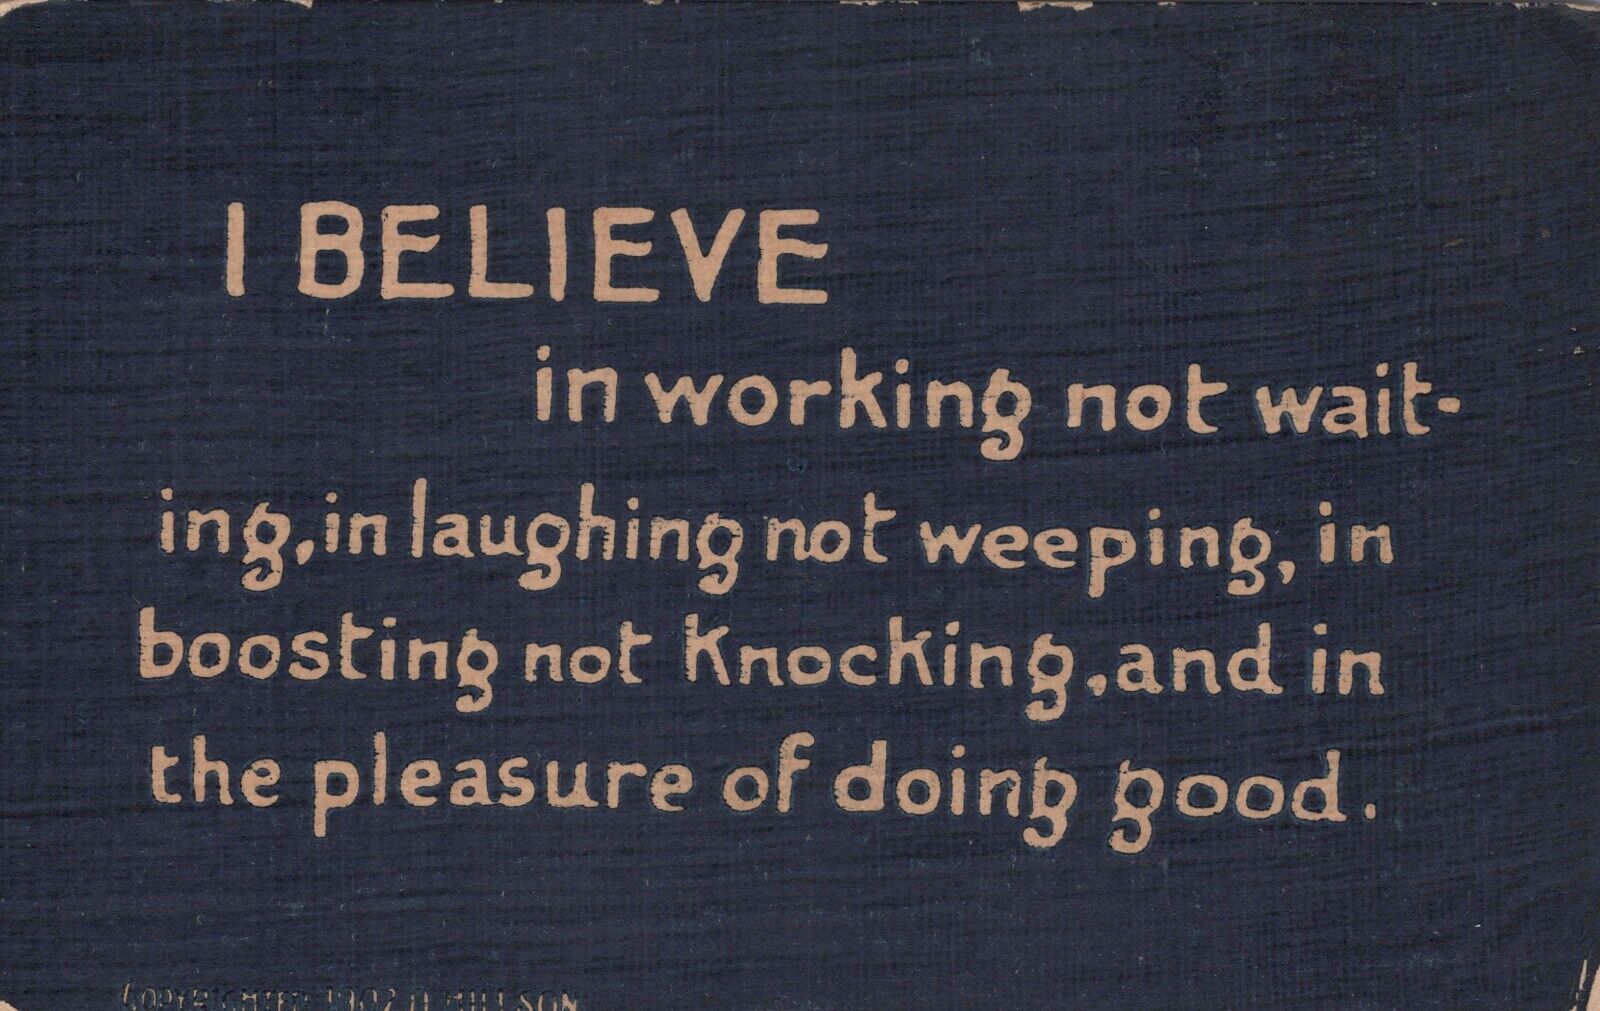 Believe in Working Not Waiting Laughing Not Weeping Posted VTG Linen Postcard